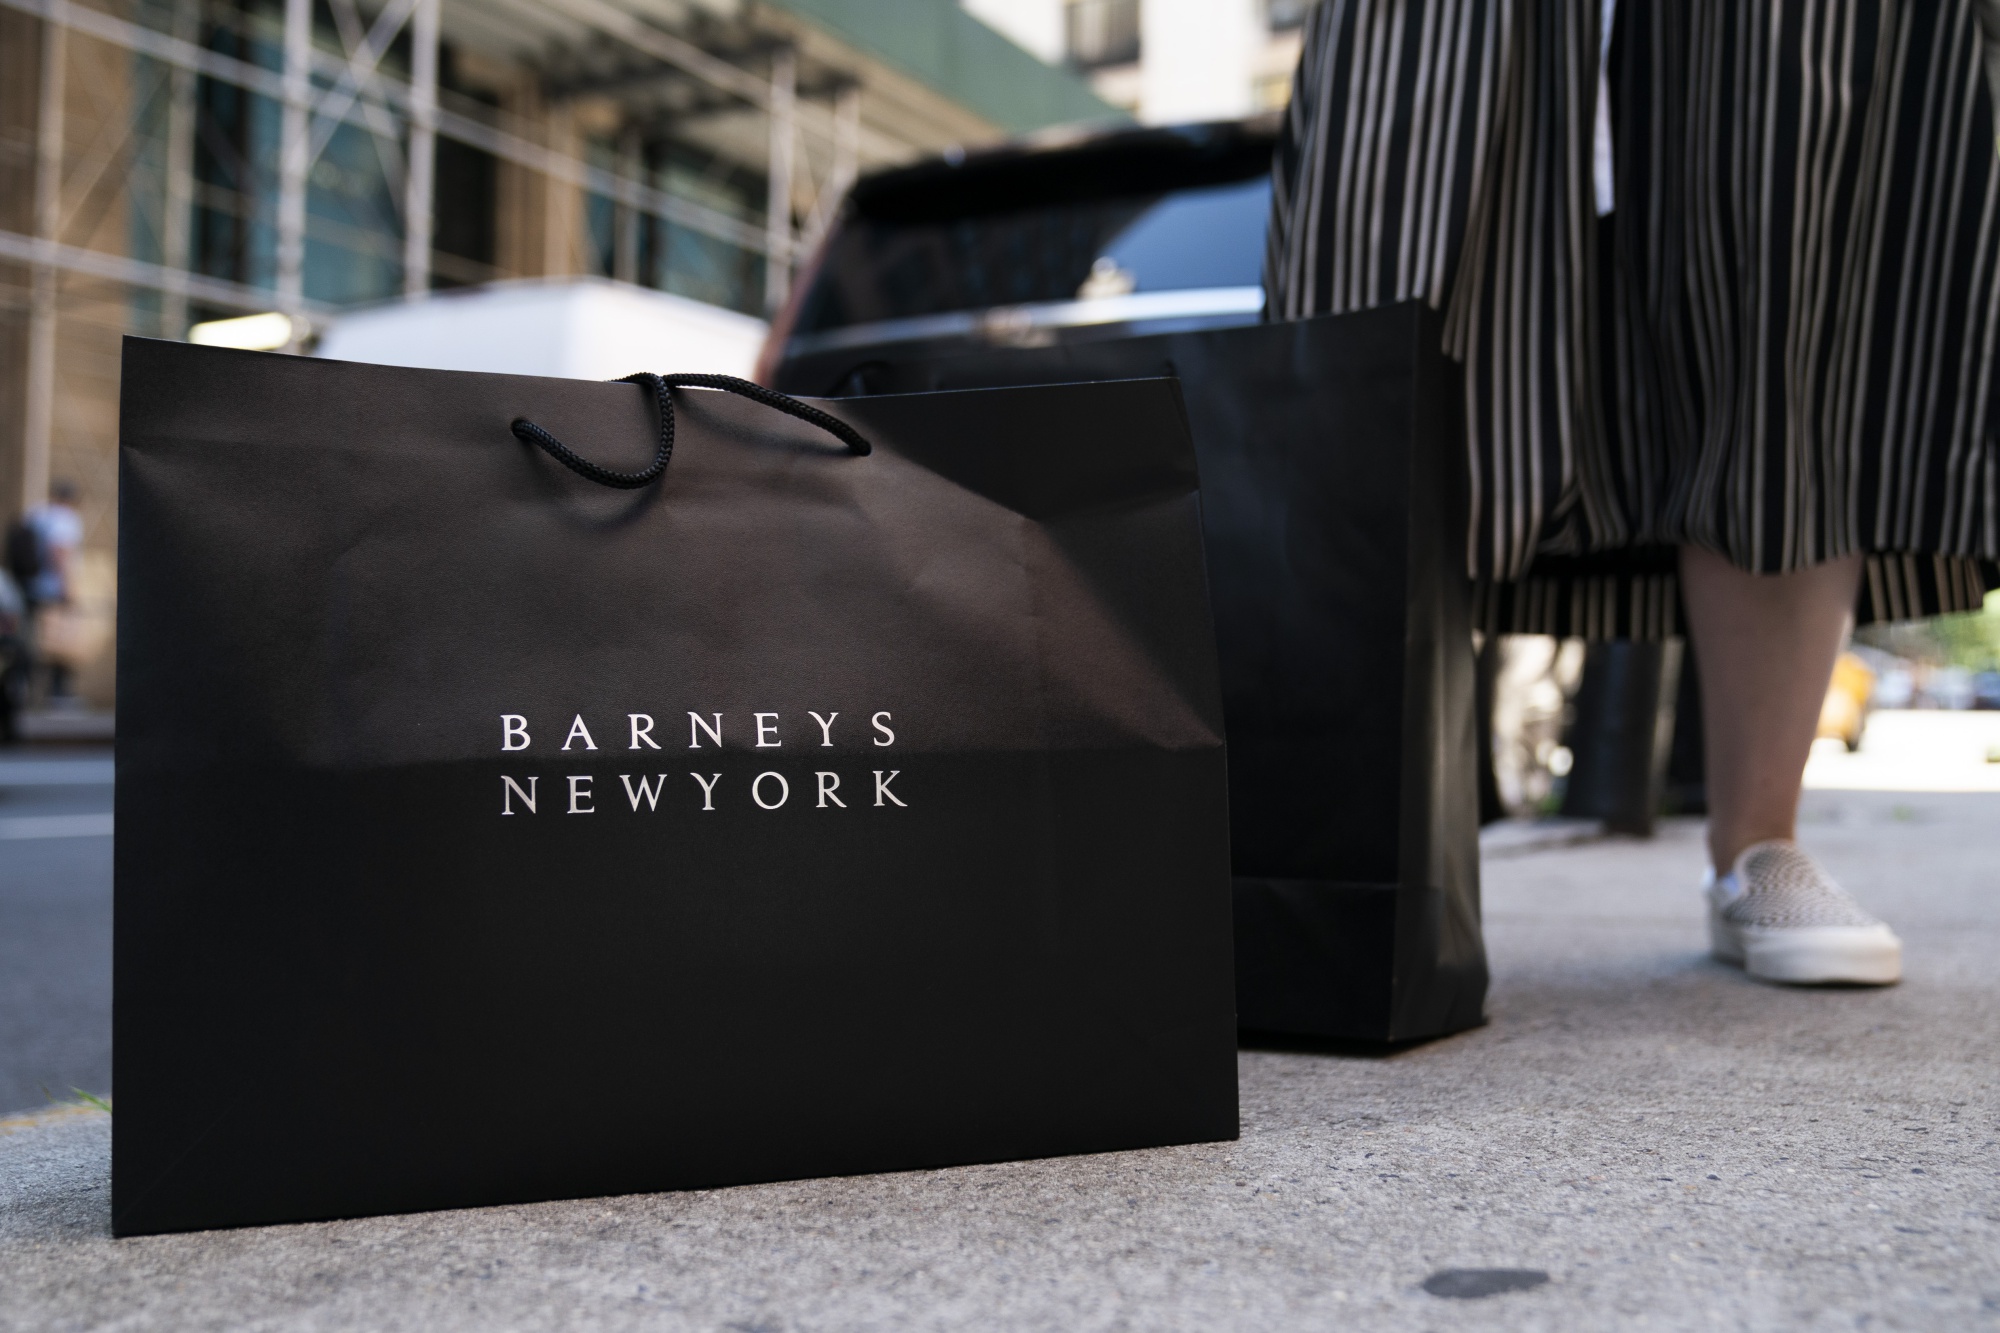 Barneys New York's future at Madison Avenue flagship is uncertain